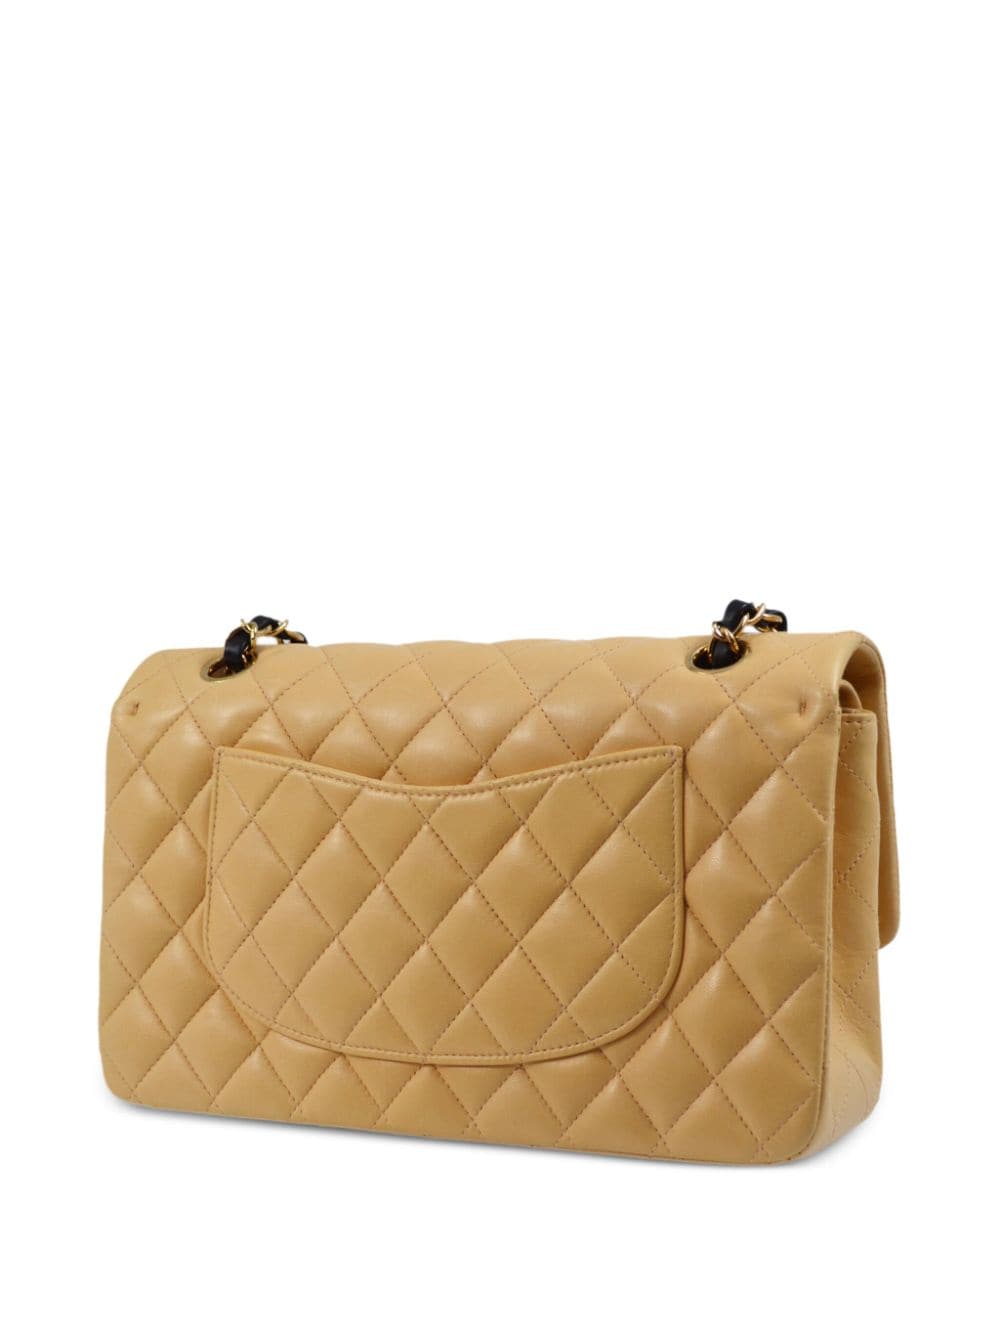 Pre-owned Chanel 2005 Medium Classic Double Flap Shoulder Bag In Neutrals